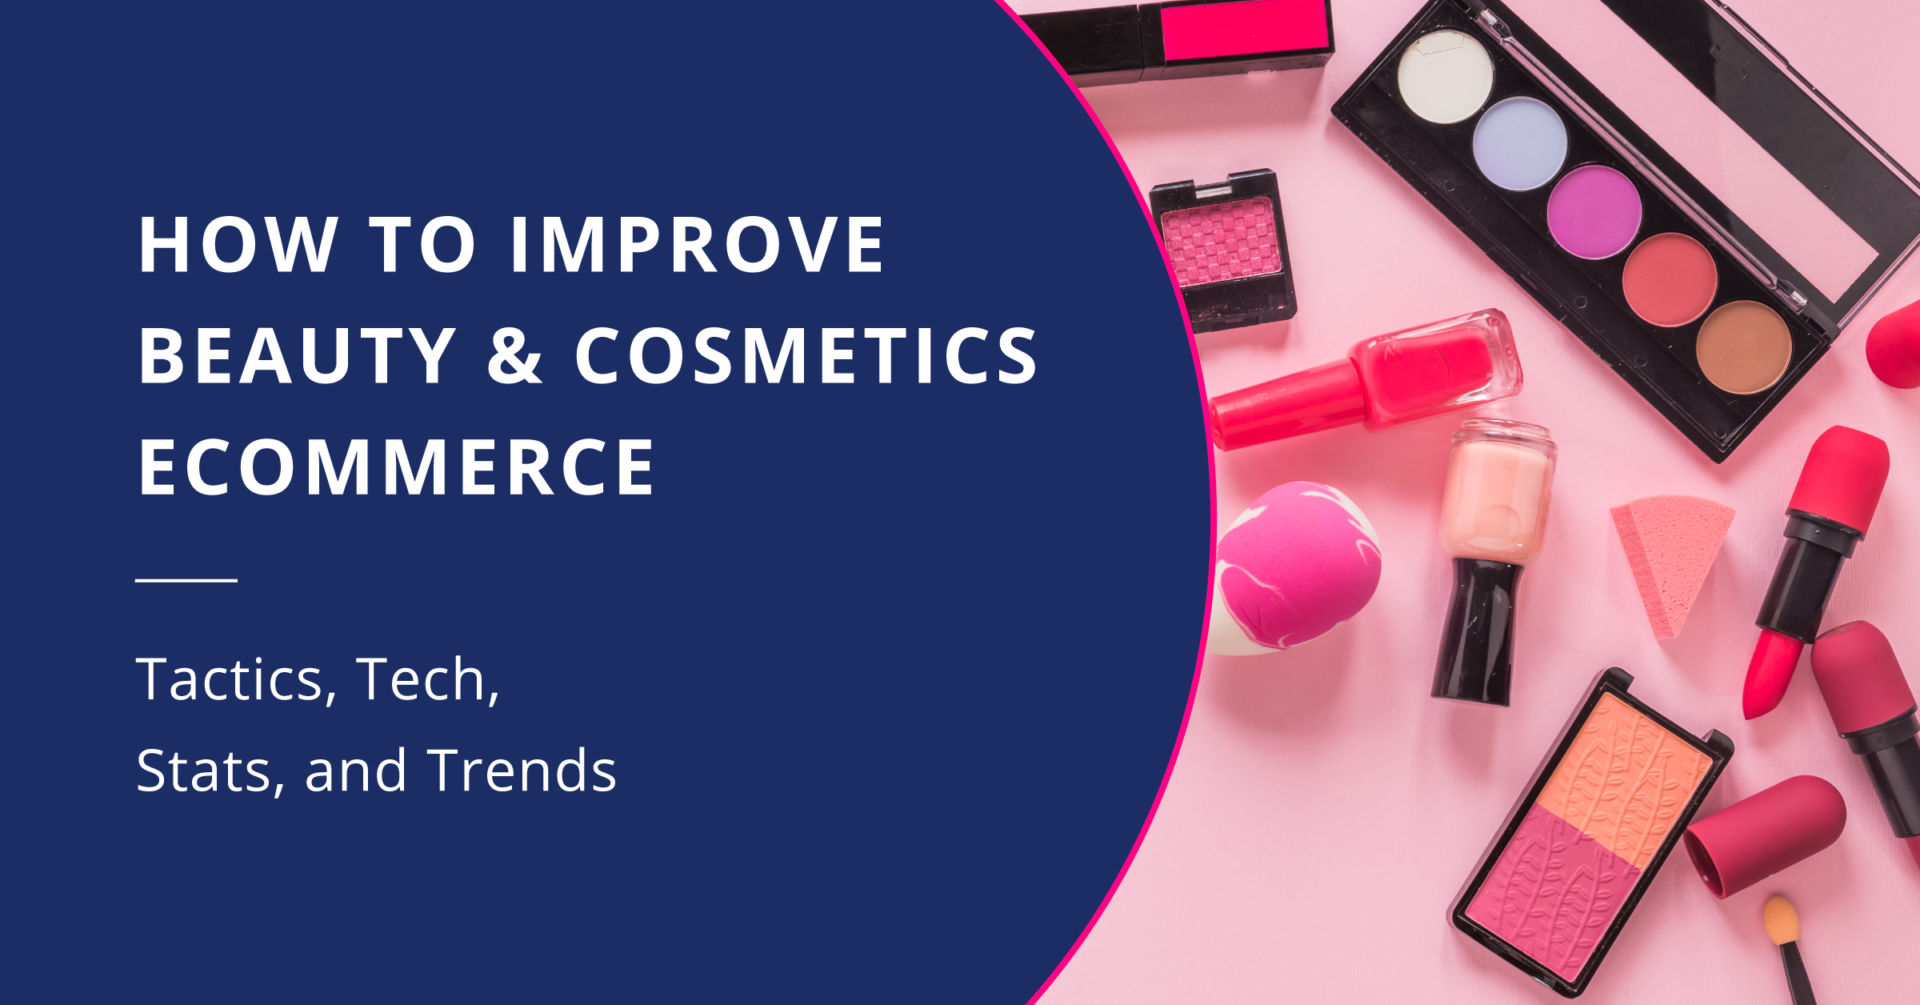 10 Problems Holding Back E-commerce Businesses In Beauty And Cosmetics (And How To Solve Them)